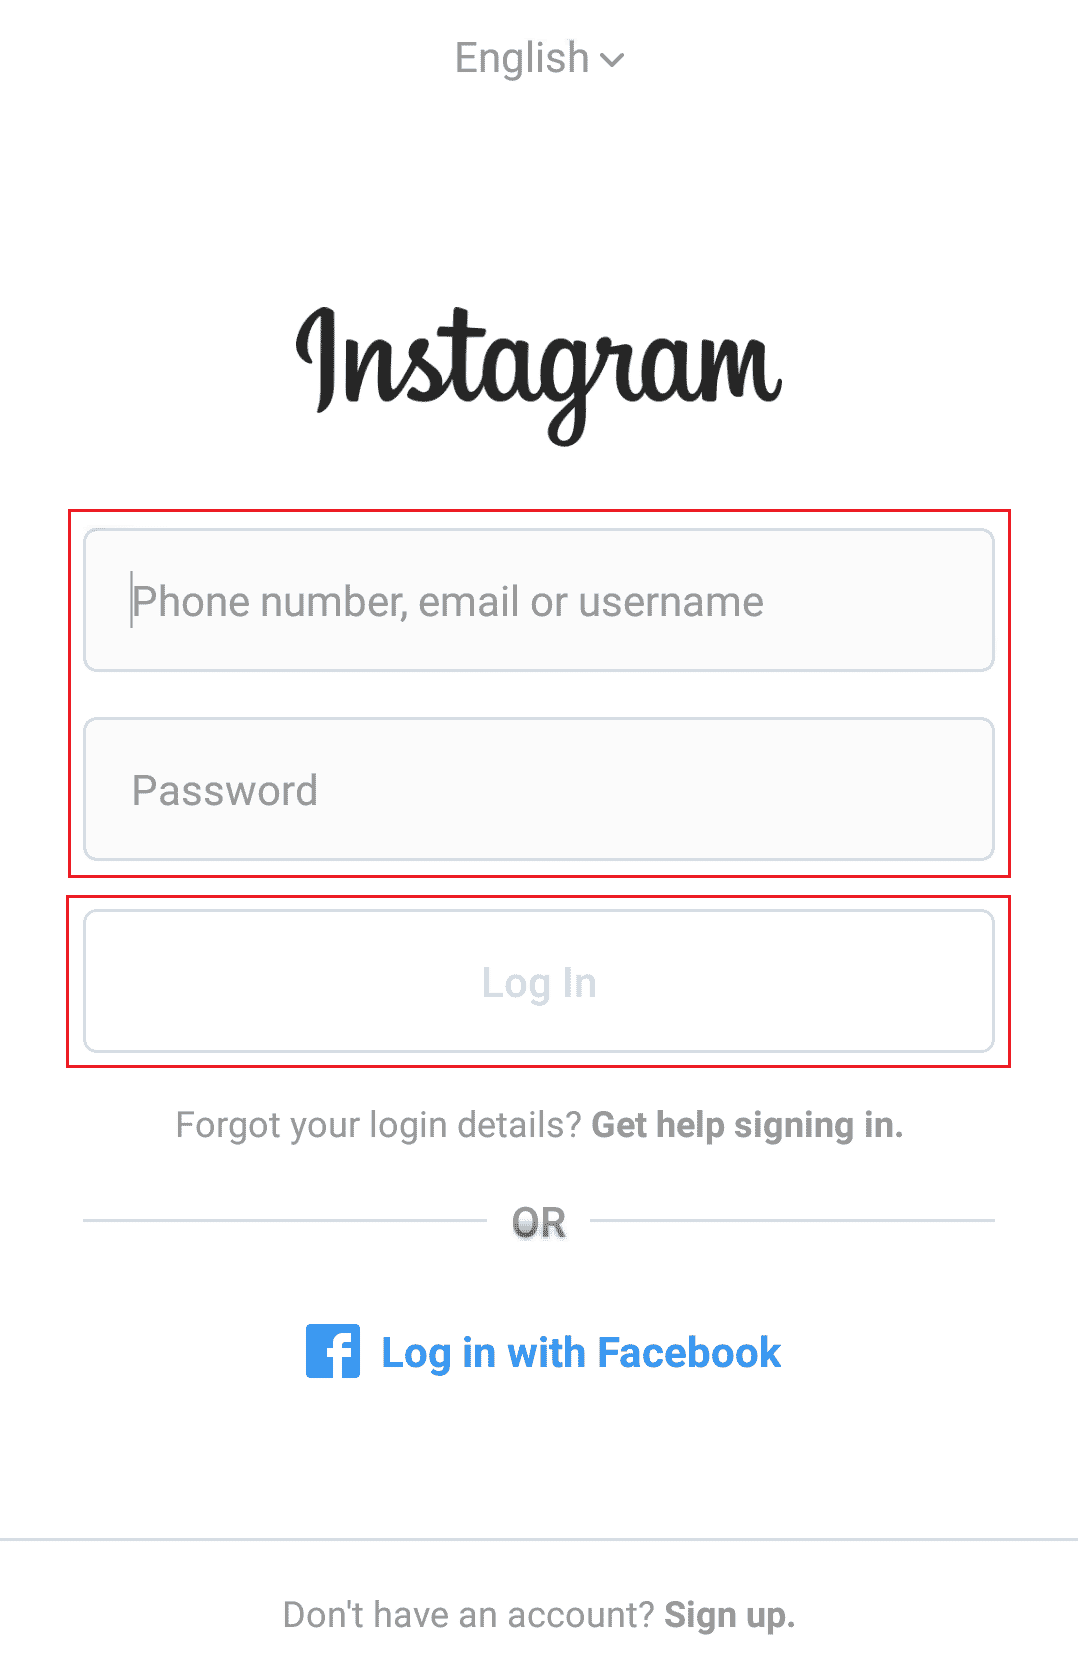 Enter your Phone number, email address, or username and Password - tap on Log In